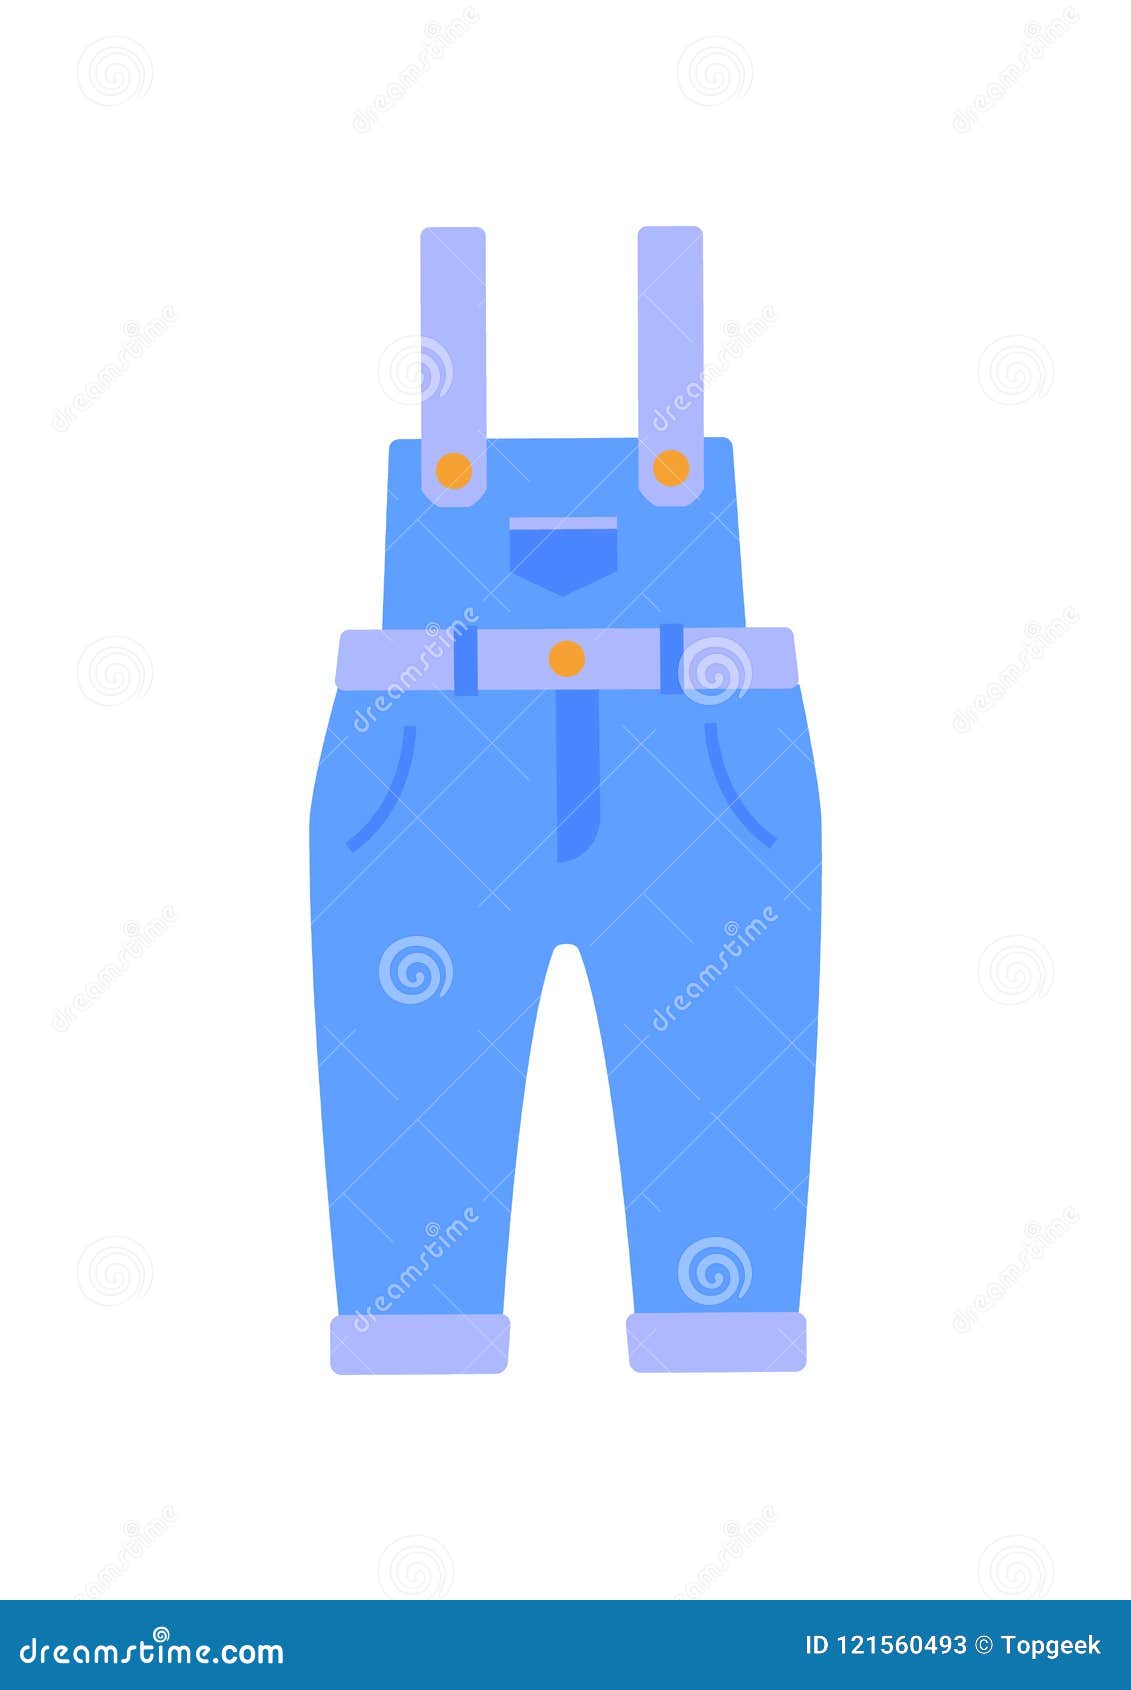 Romper Suit of Jeans Poster Vector Illustration Stock Vector ...